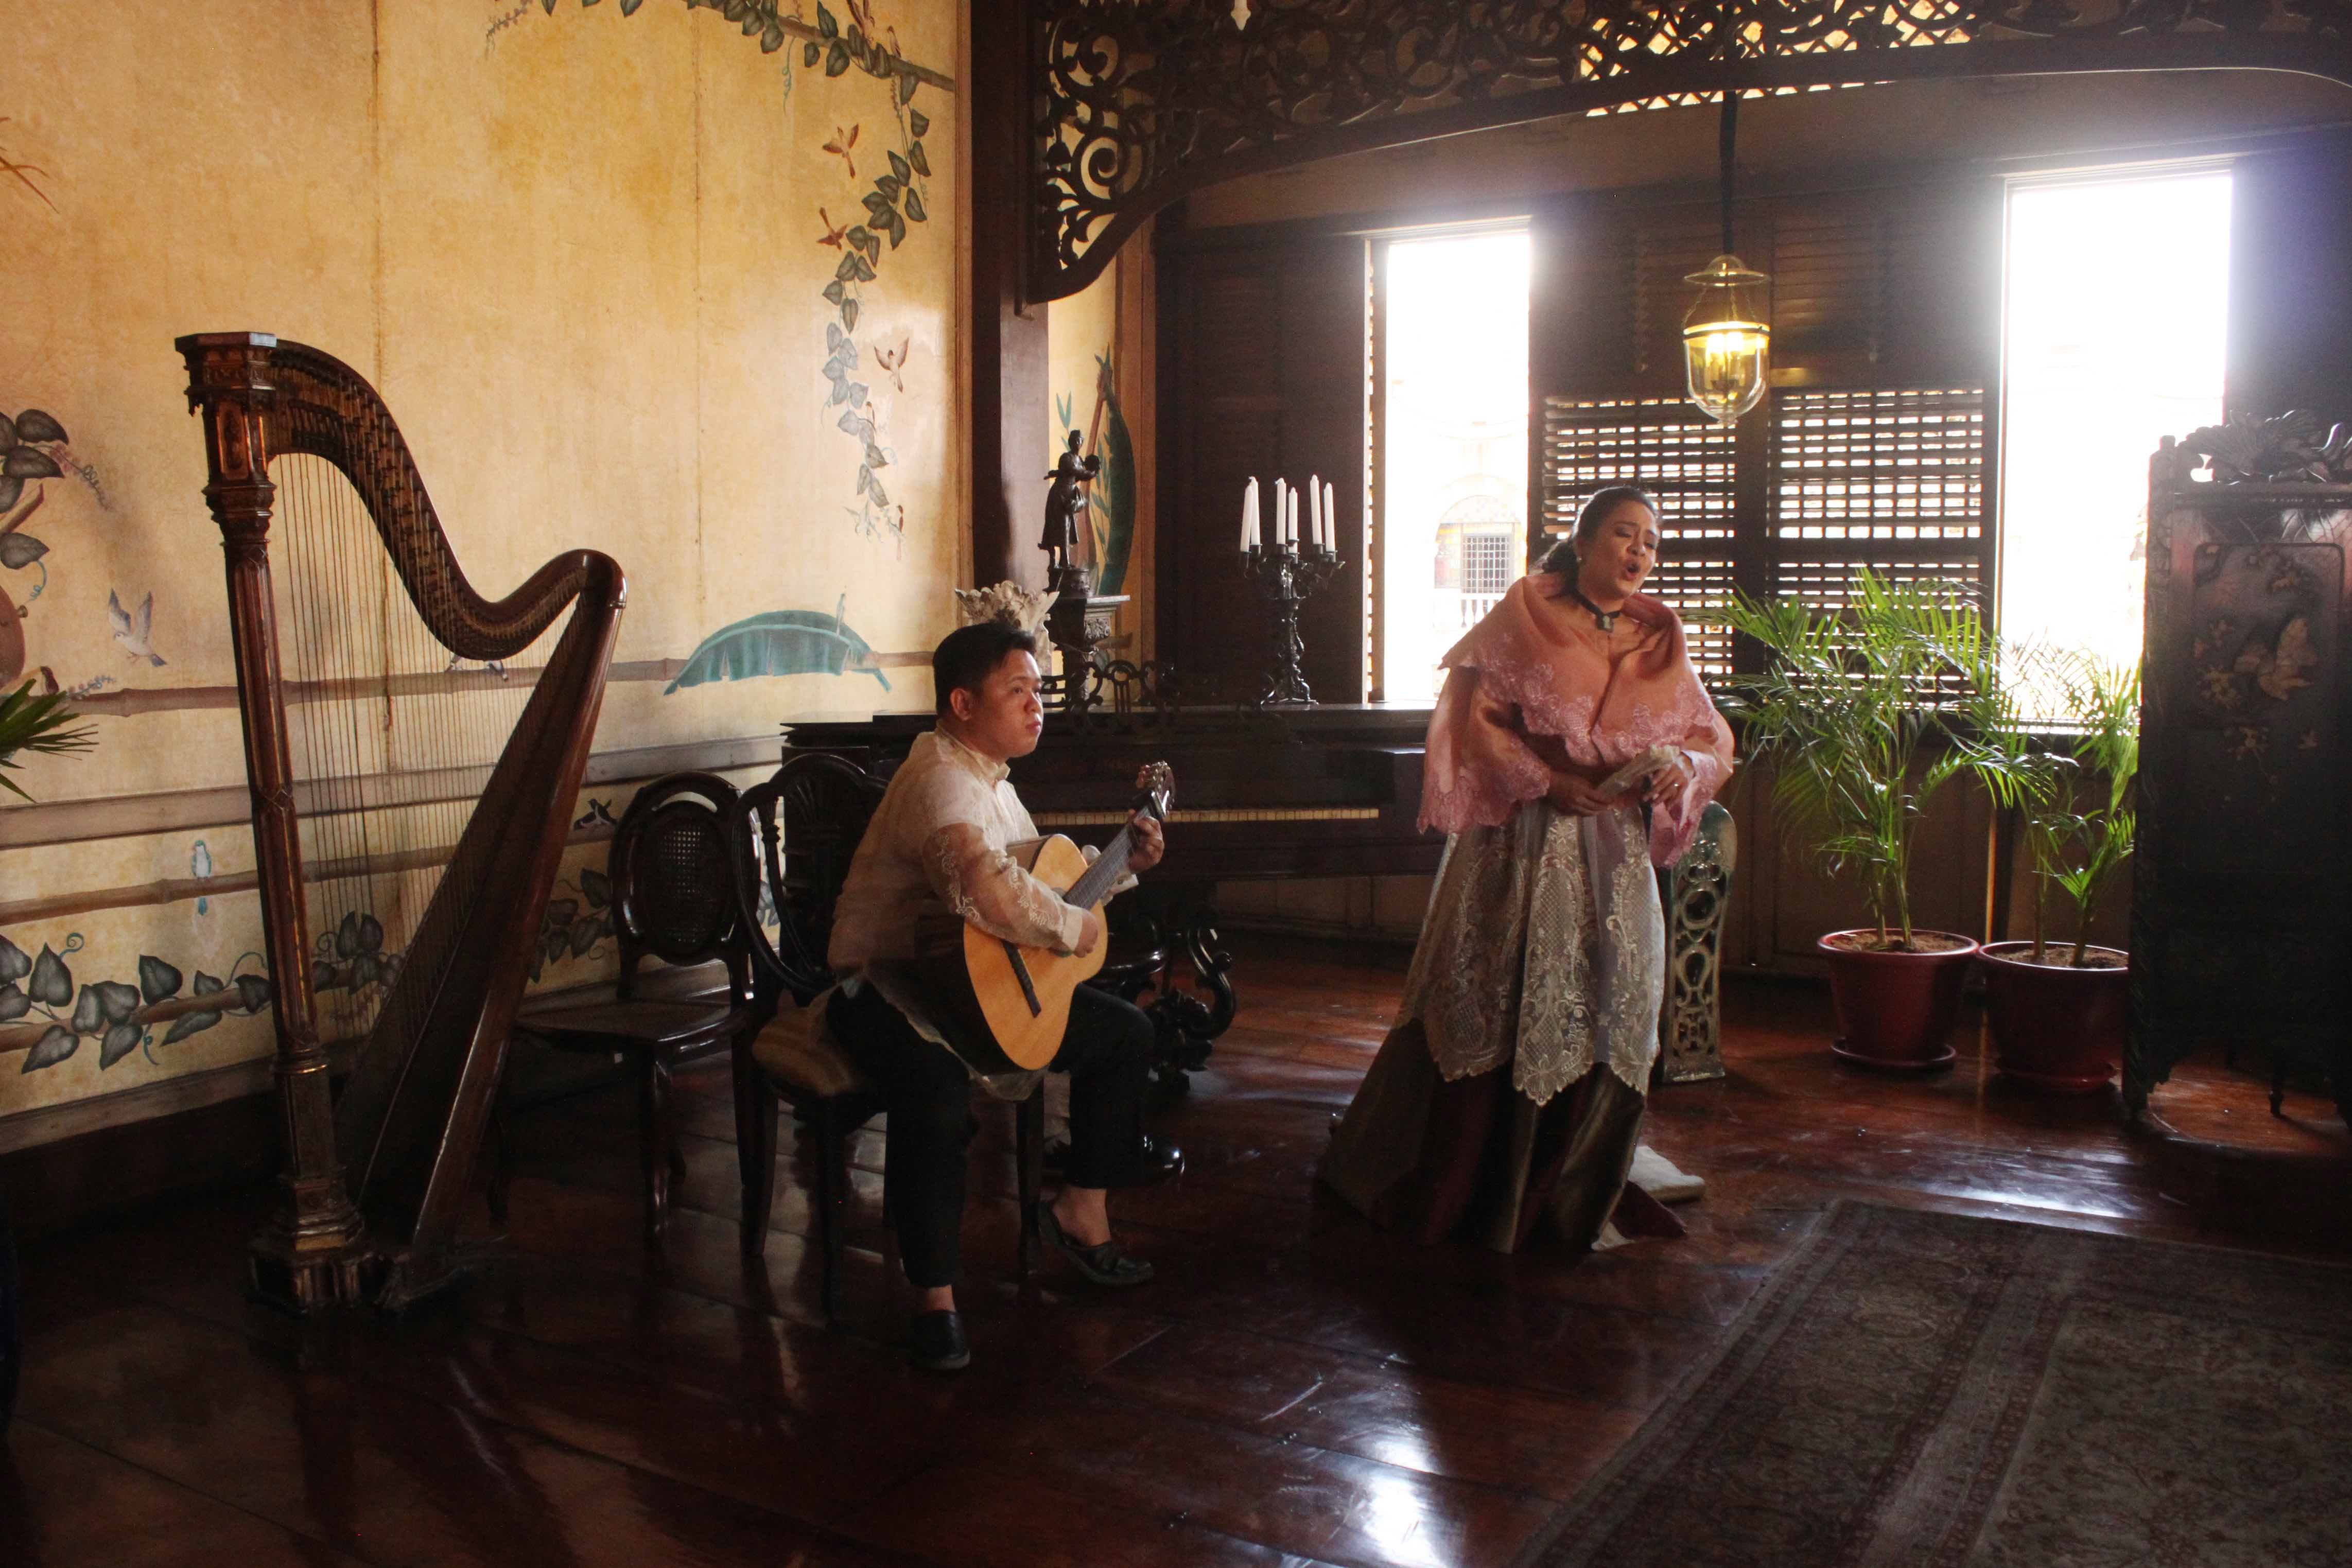 MORE SONGS. Performers in traditional Filipino wear serenade the spouses.